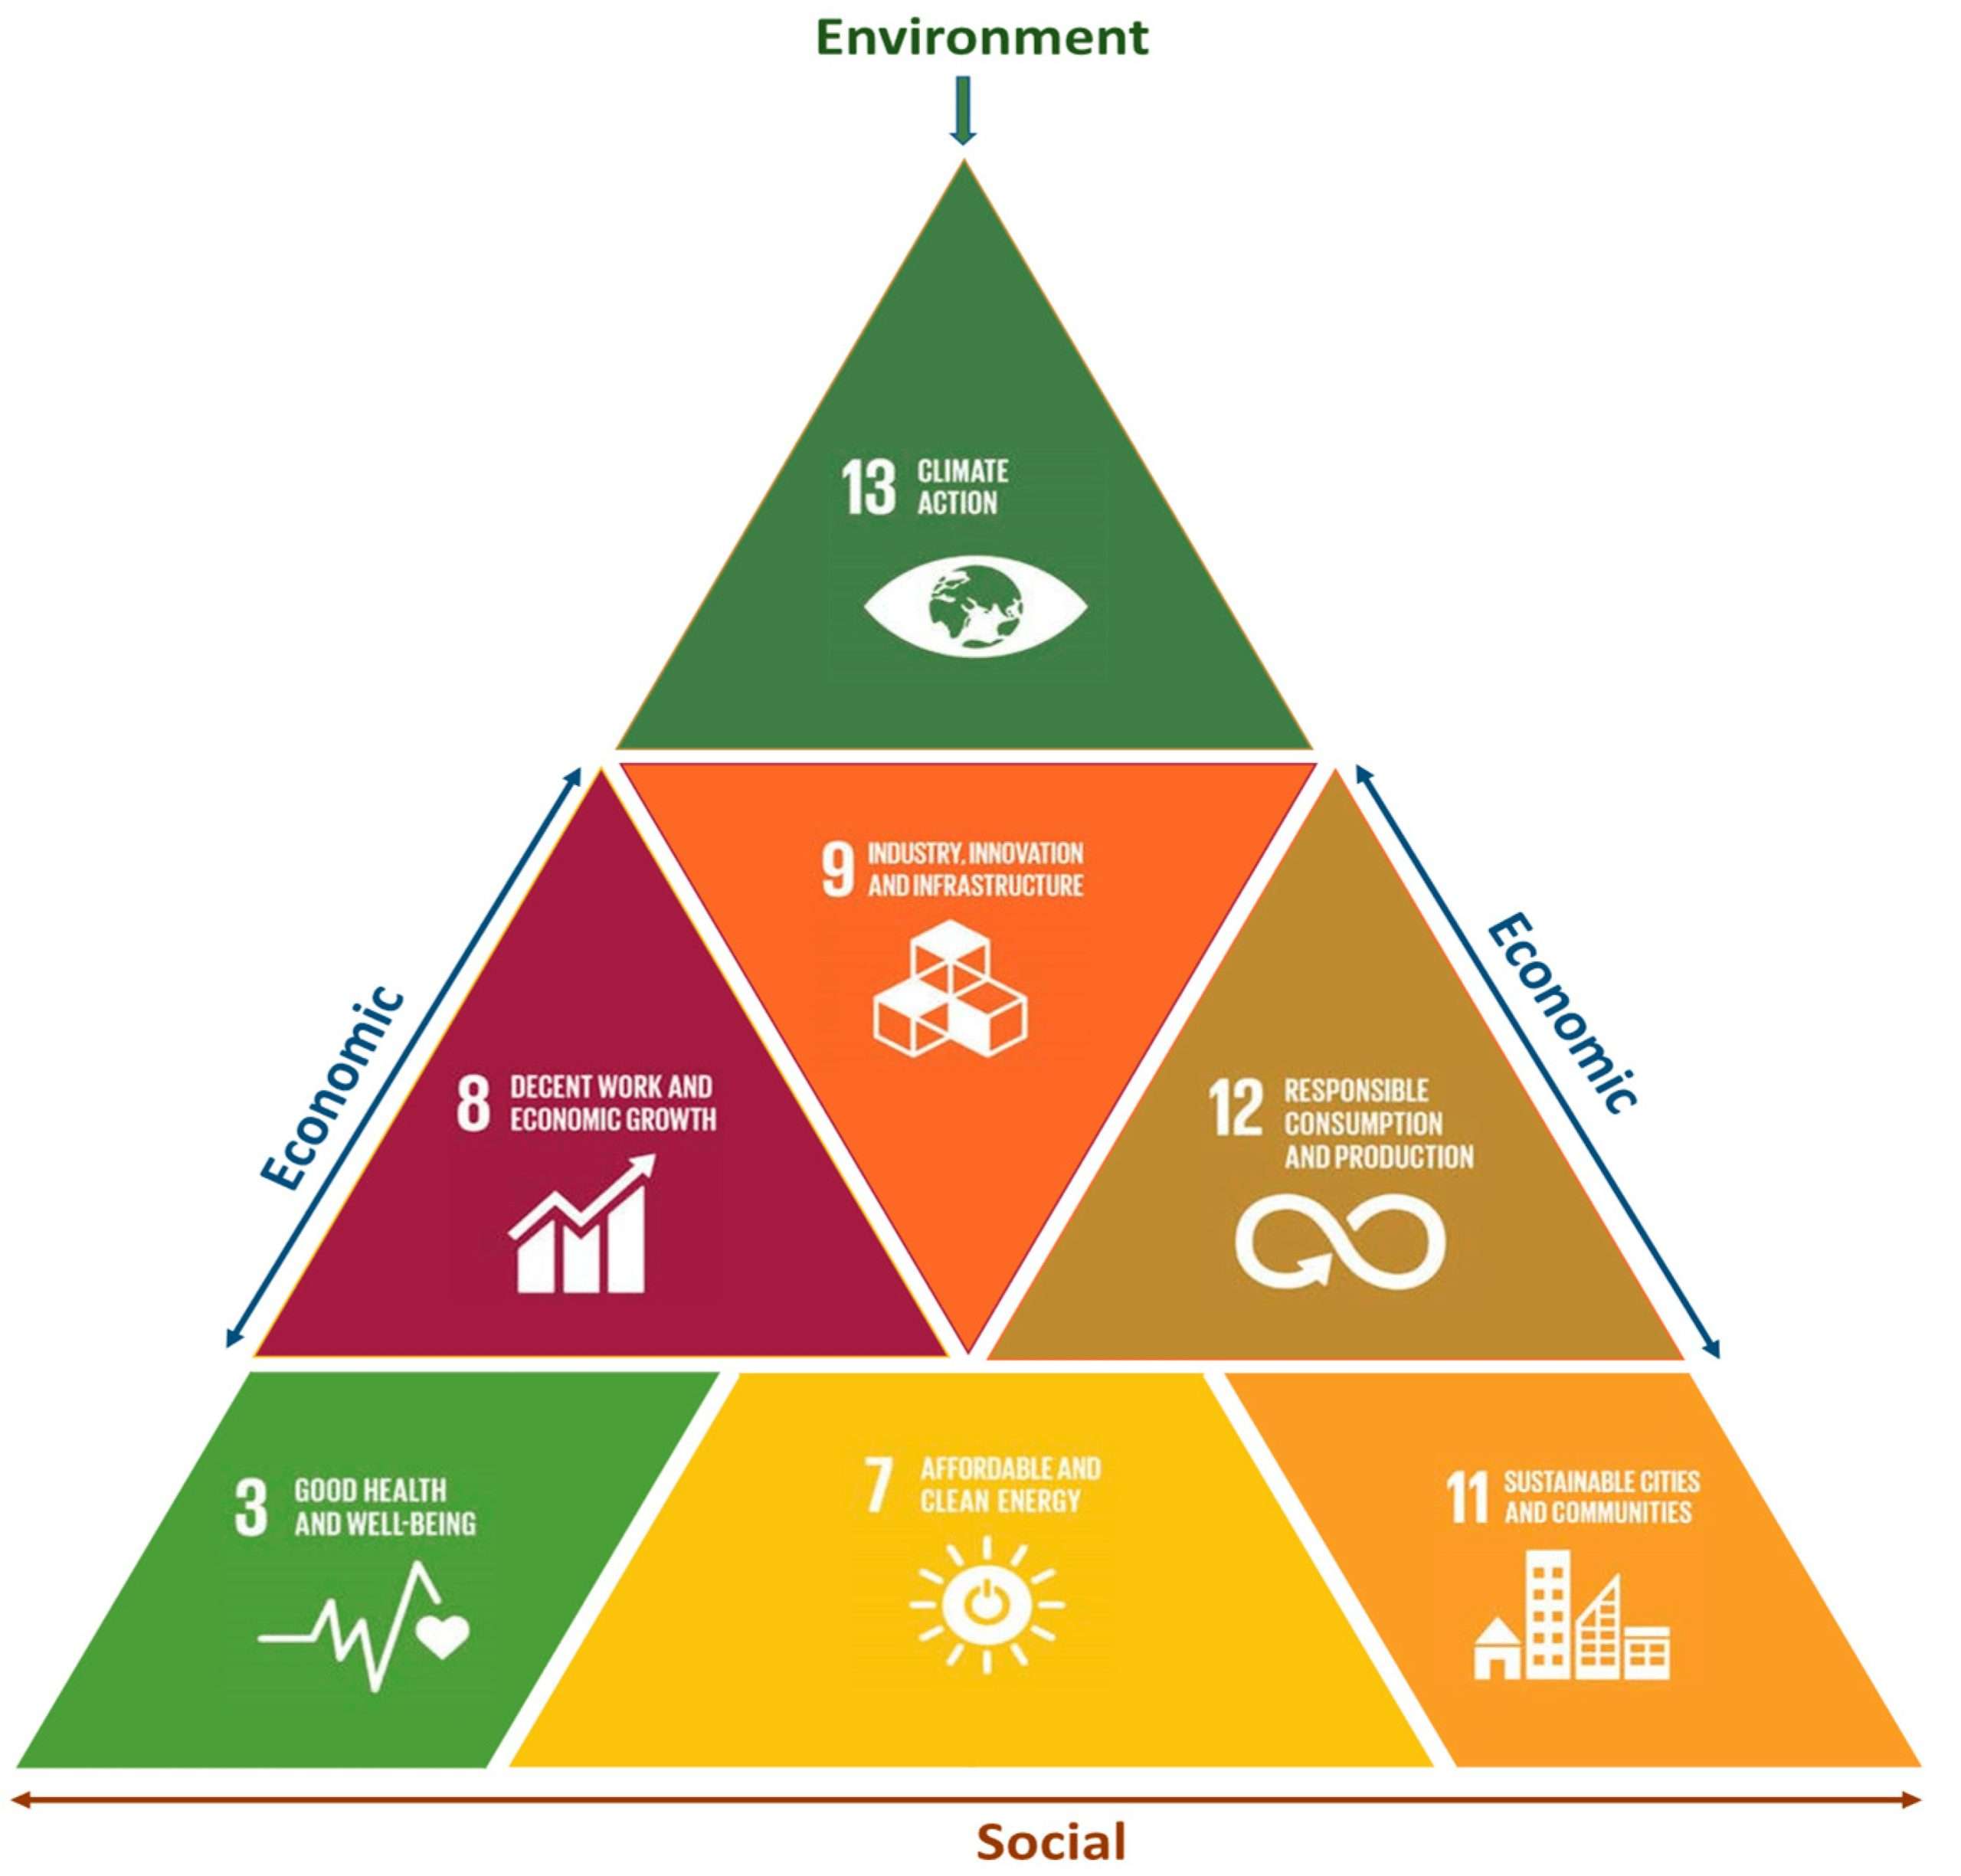 Silicon anode technology, and in particular, EVs, have an impact on three aspects of sustainability. These include social, economic, and environmental sustainability, as well as a significant association with seven of the 17 SDGs. 